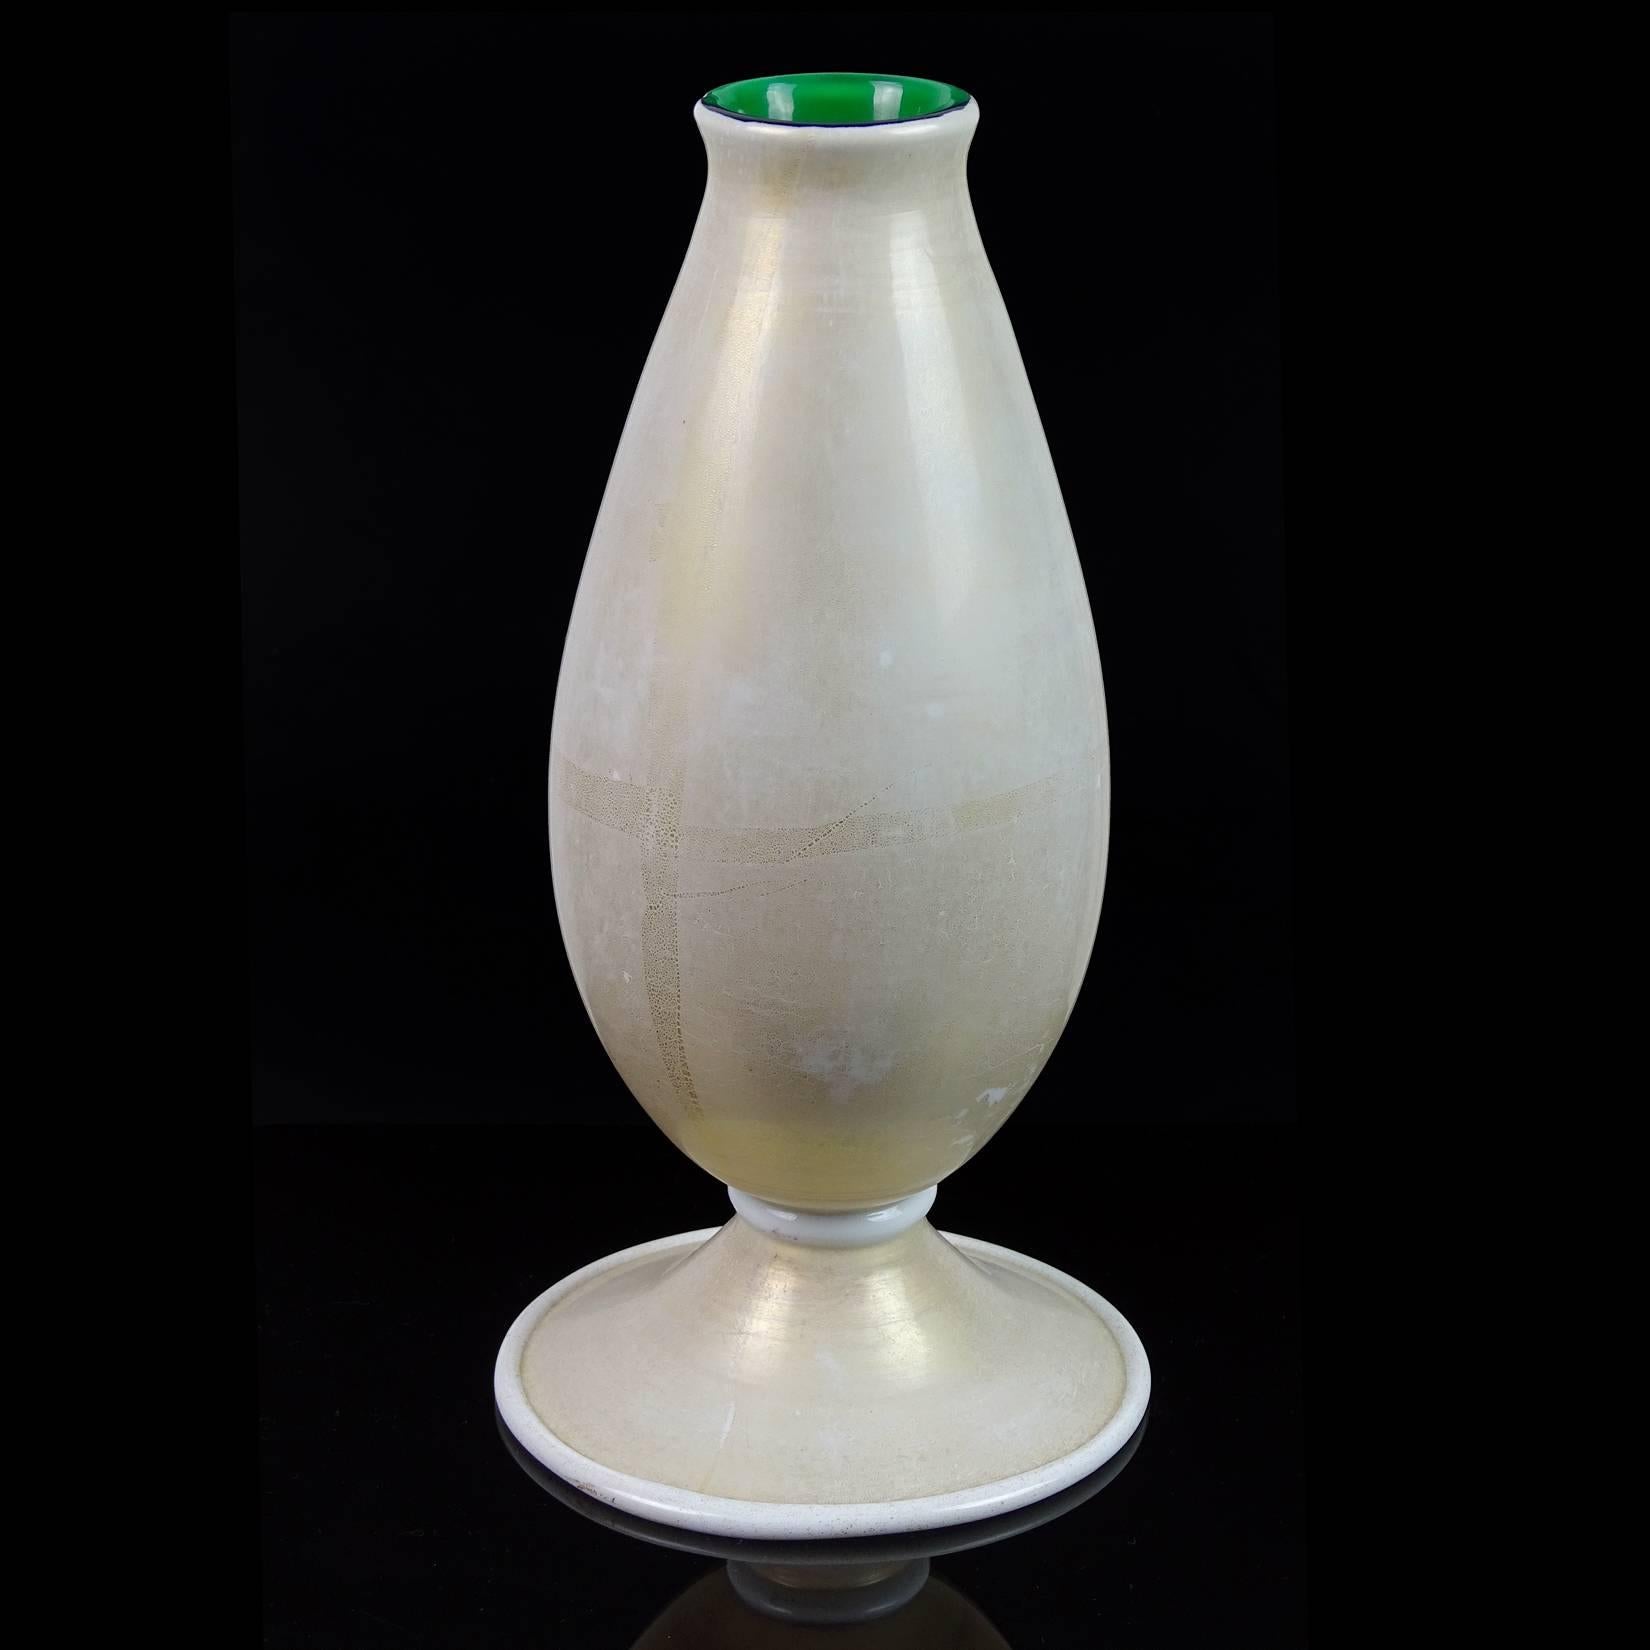 Free shipping worldwide! See details below description.

Gorgeous large Murano handblown white, with heavy gold flecks, white pasta trim and green art glass vase. In the manner of the Venini company. Profusely covered in gold leaf. Original label